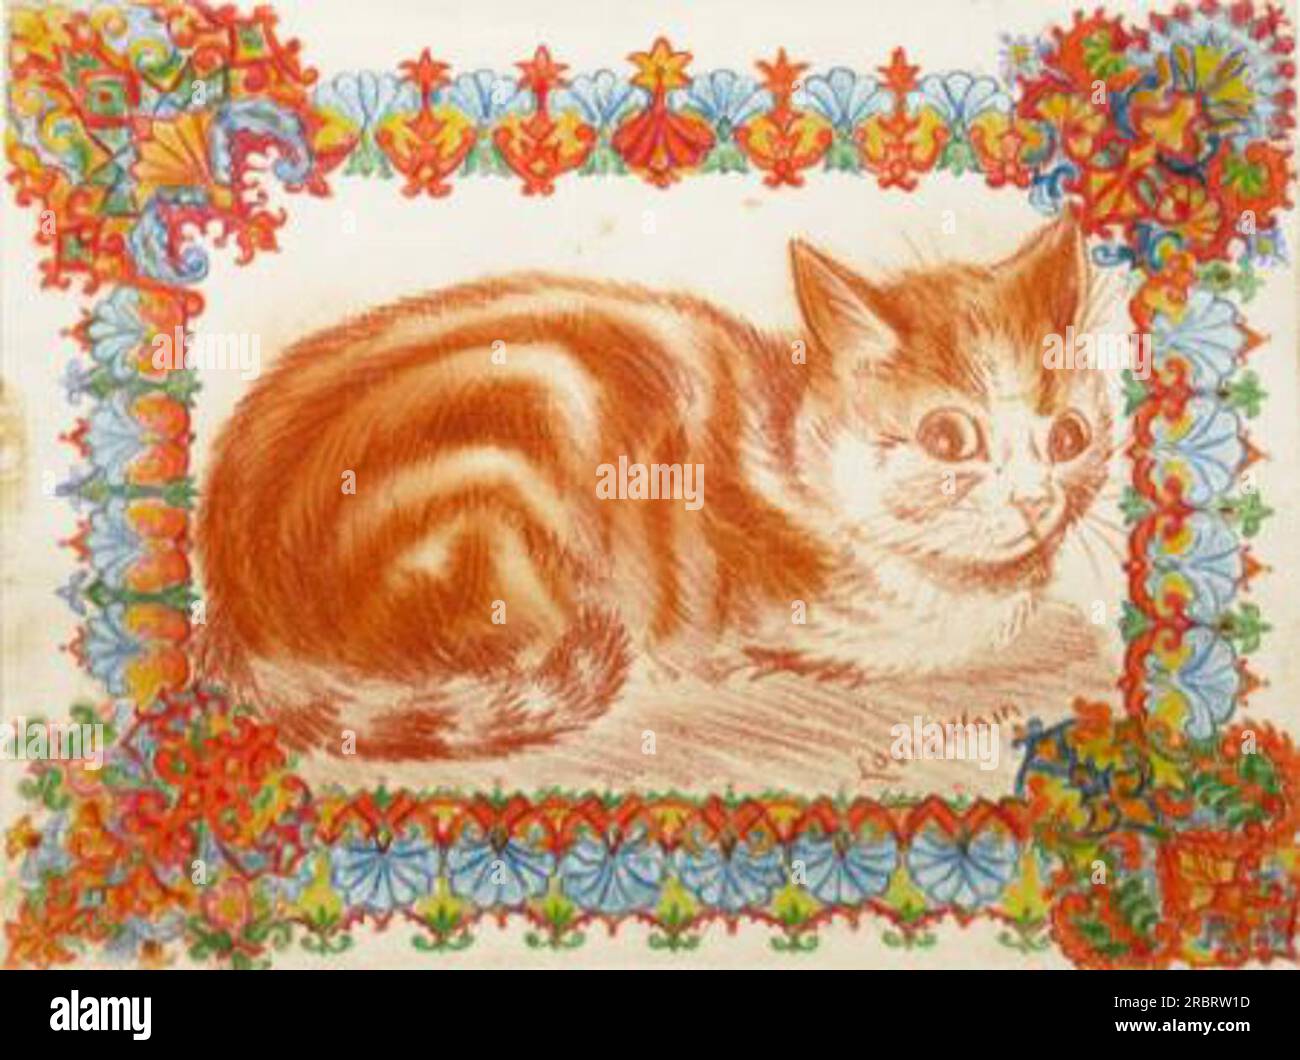 Louis wain hi-res stock photography and images - Alamy